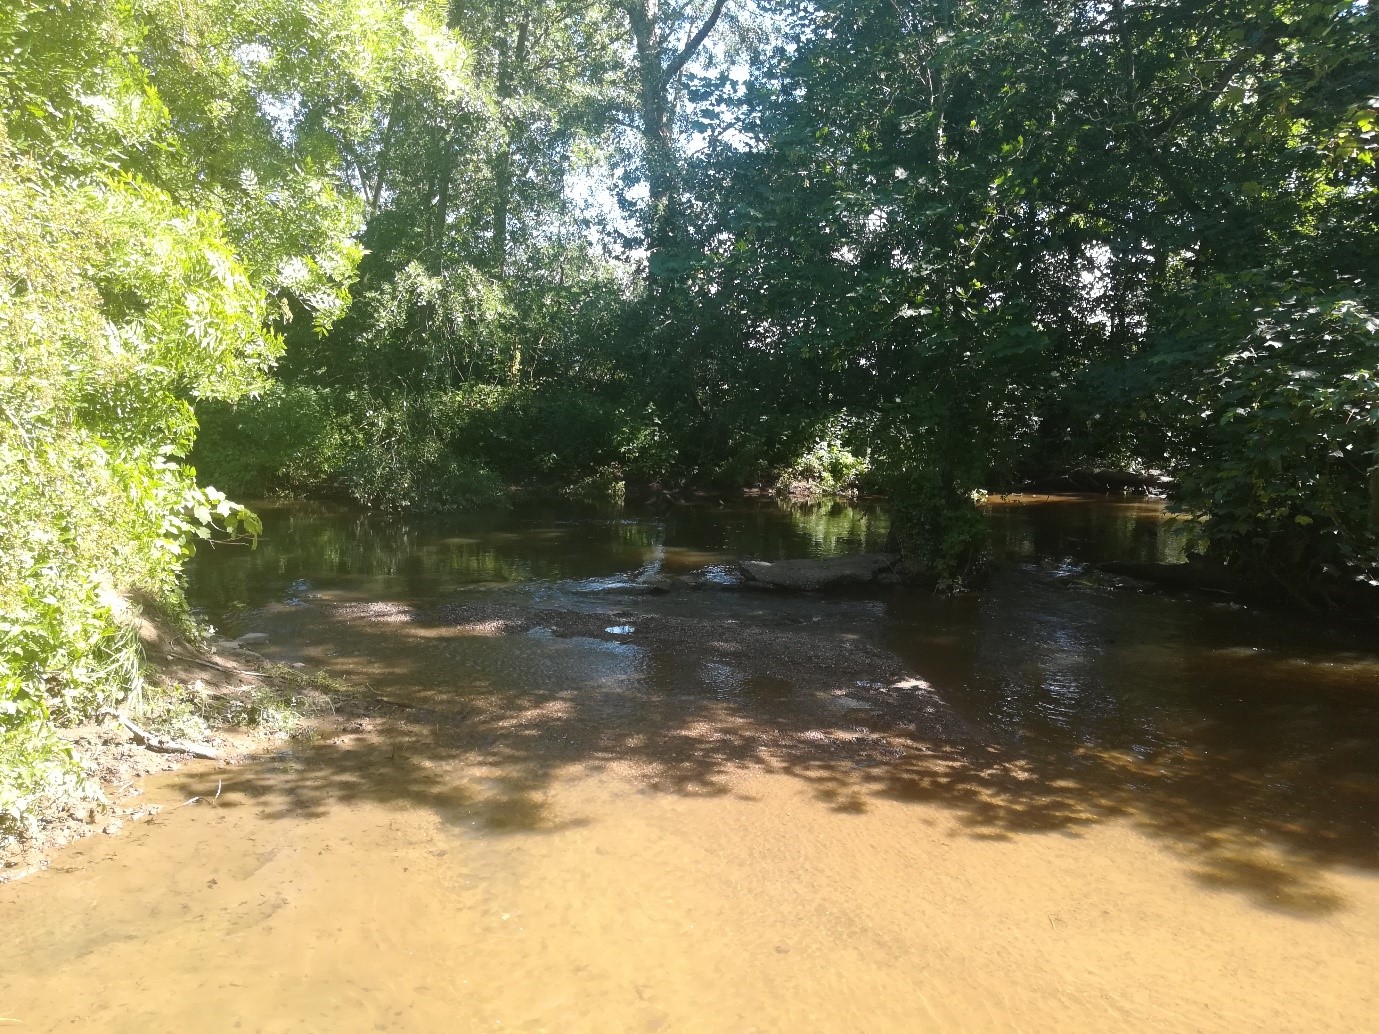 A shaded shallow area in the lower River Culm